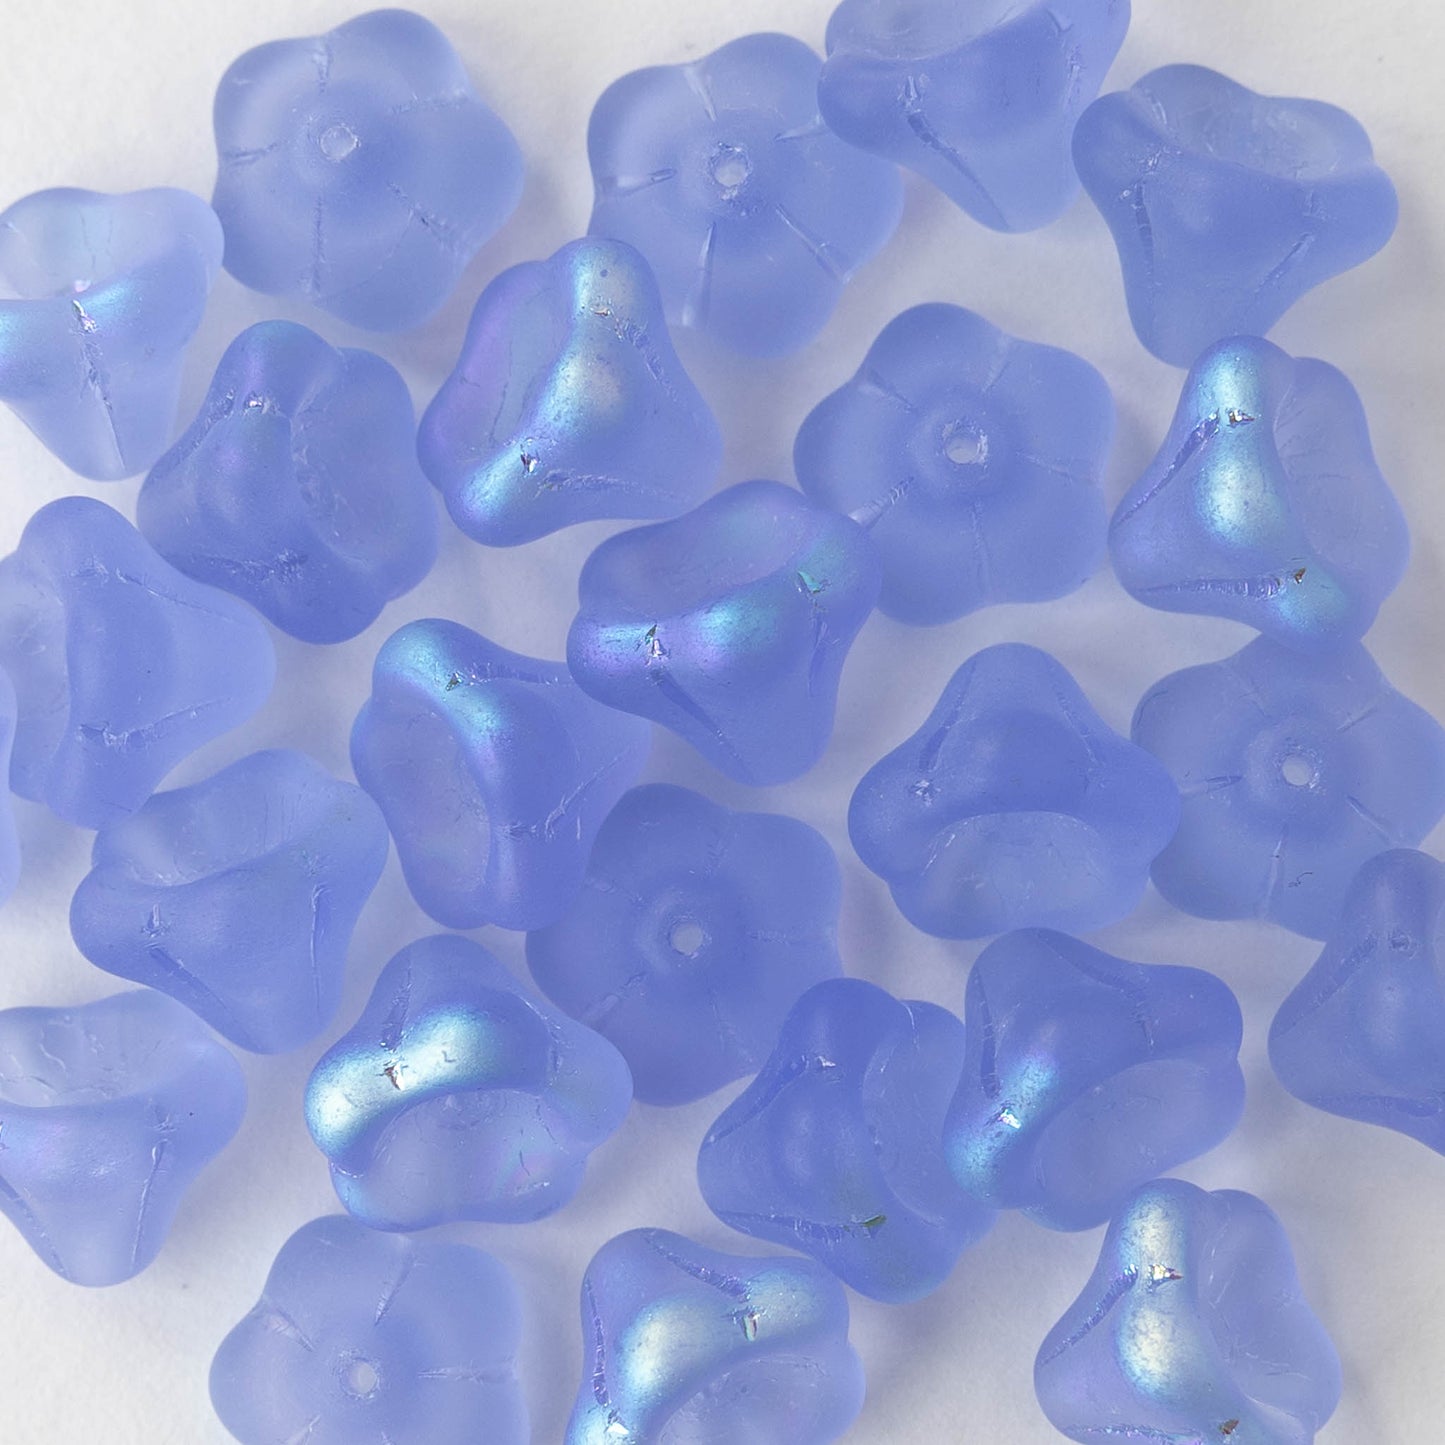 Load image into Gallery viewer, 10x12mm Trumpet Flower Beads - Alexandrite AB - 10 beads
